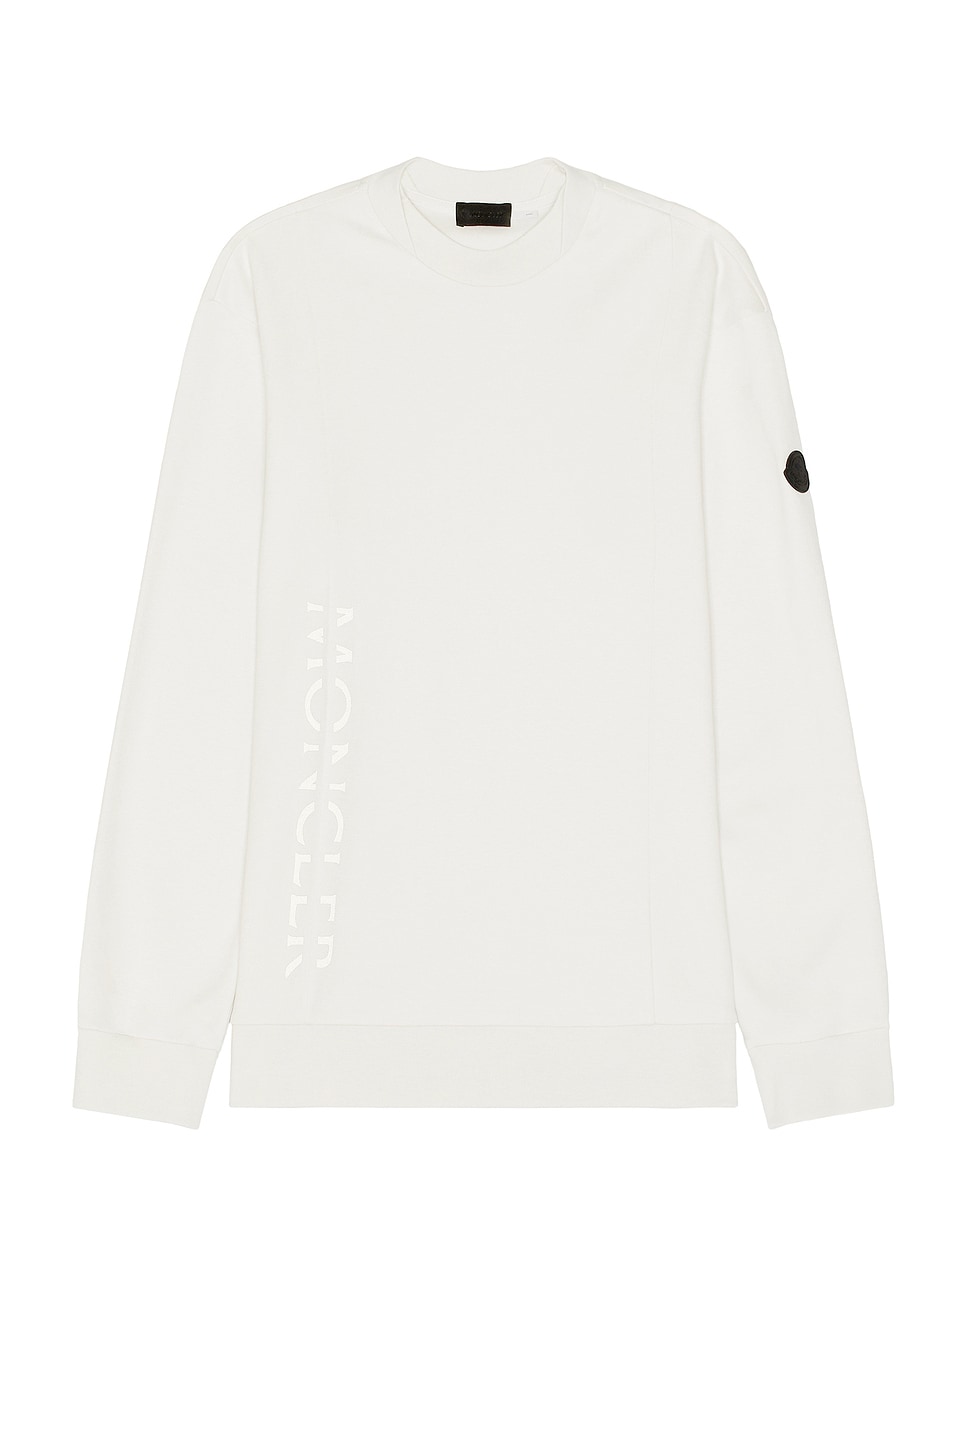 Image 1 of Moncler Sweater in White